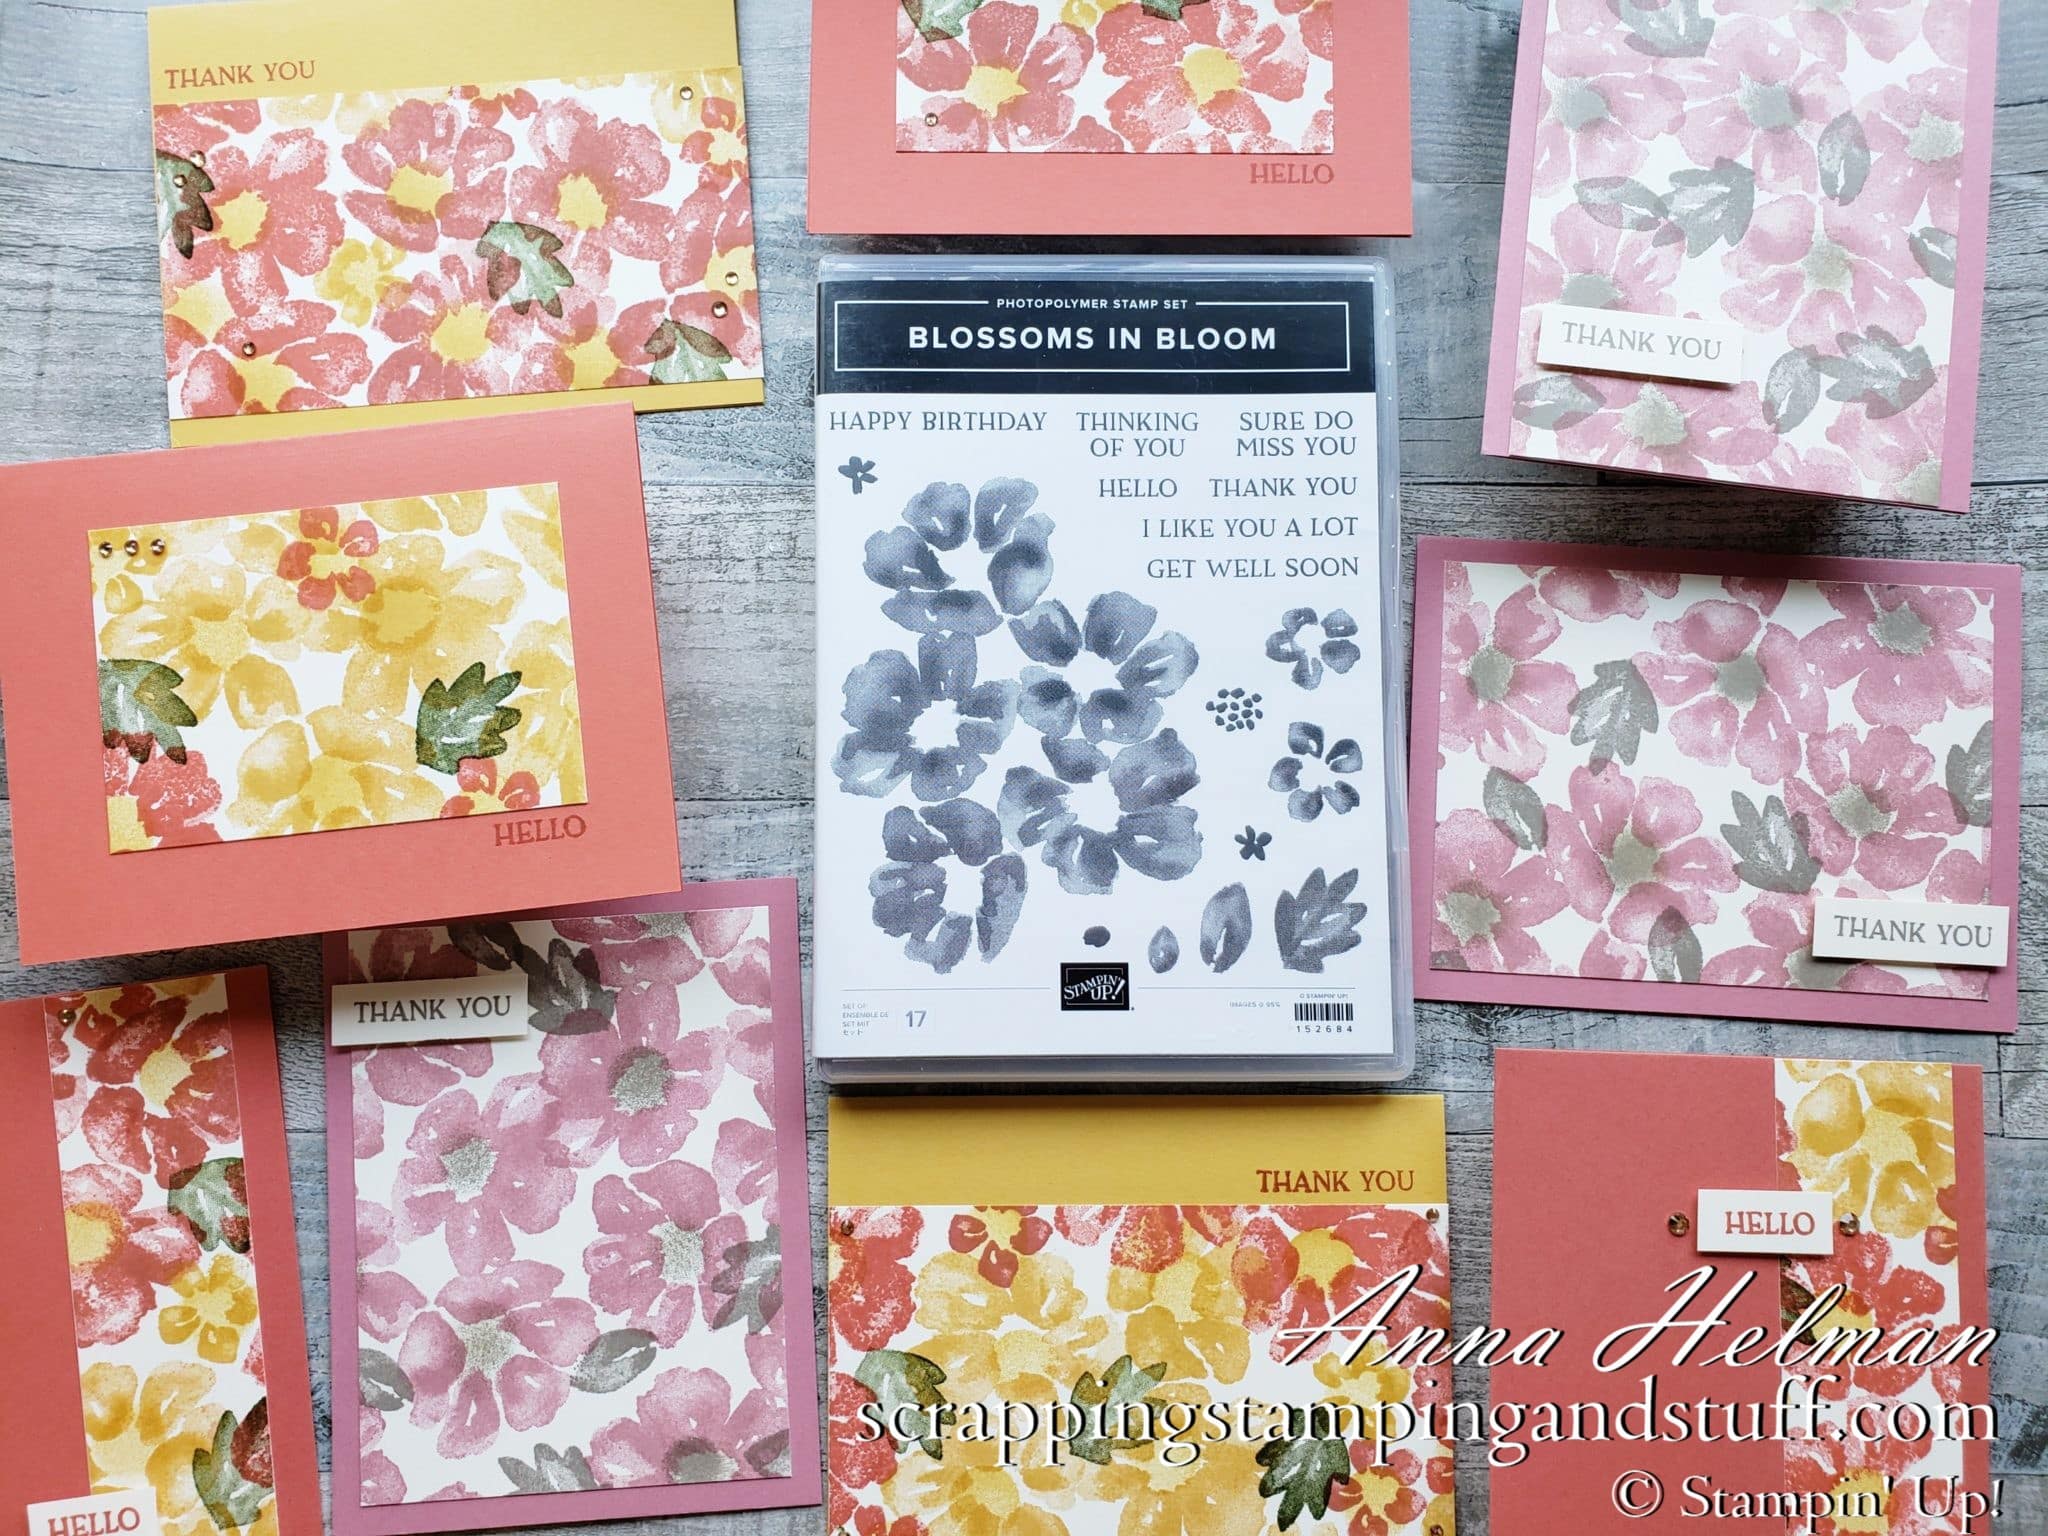 10 Simple Cards Using The Blossoms In Bloom Stamp Set